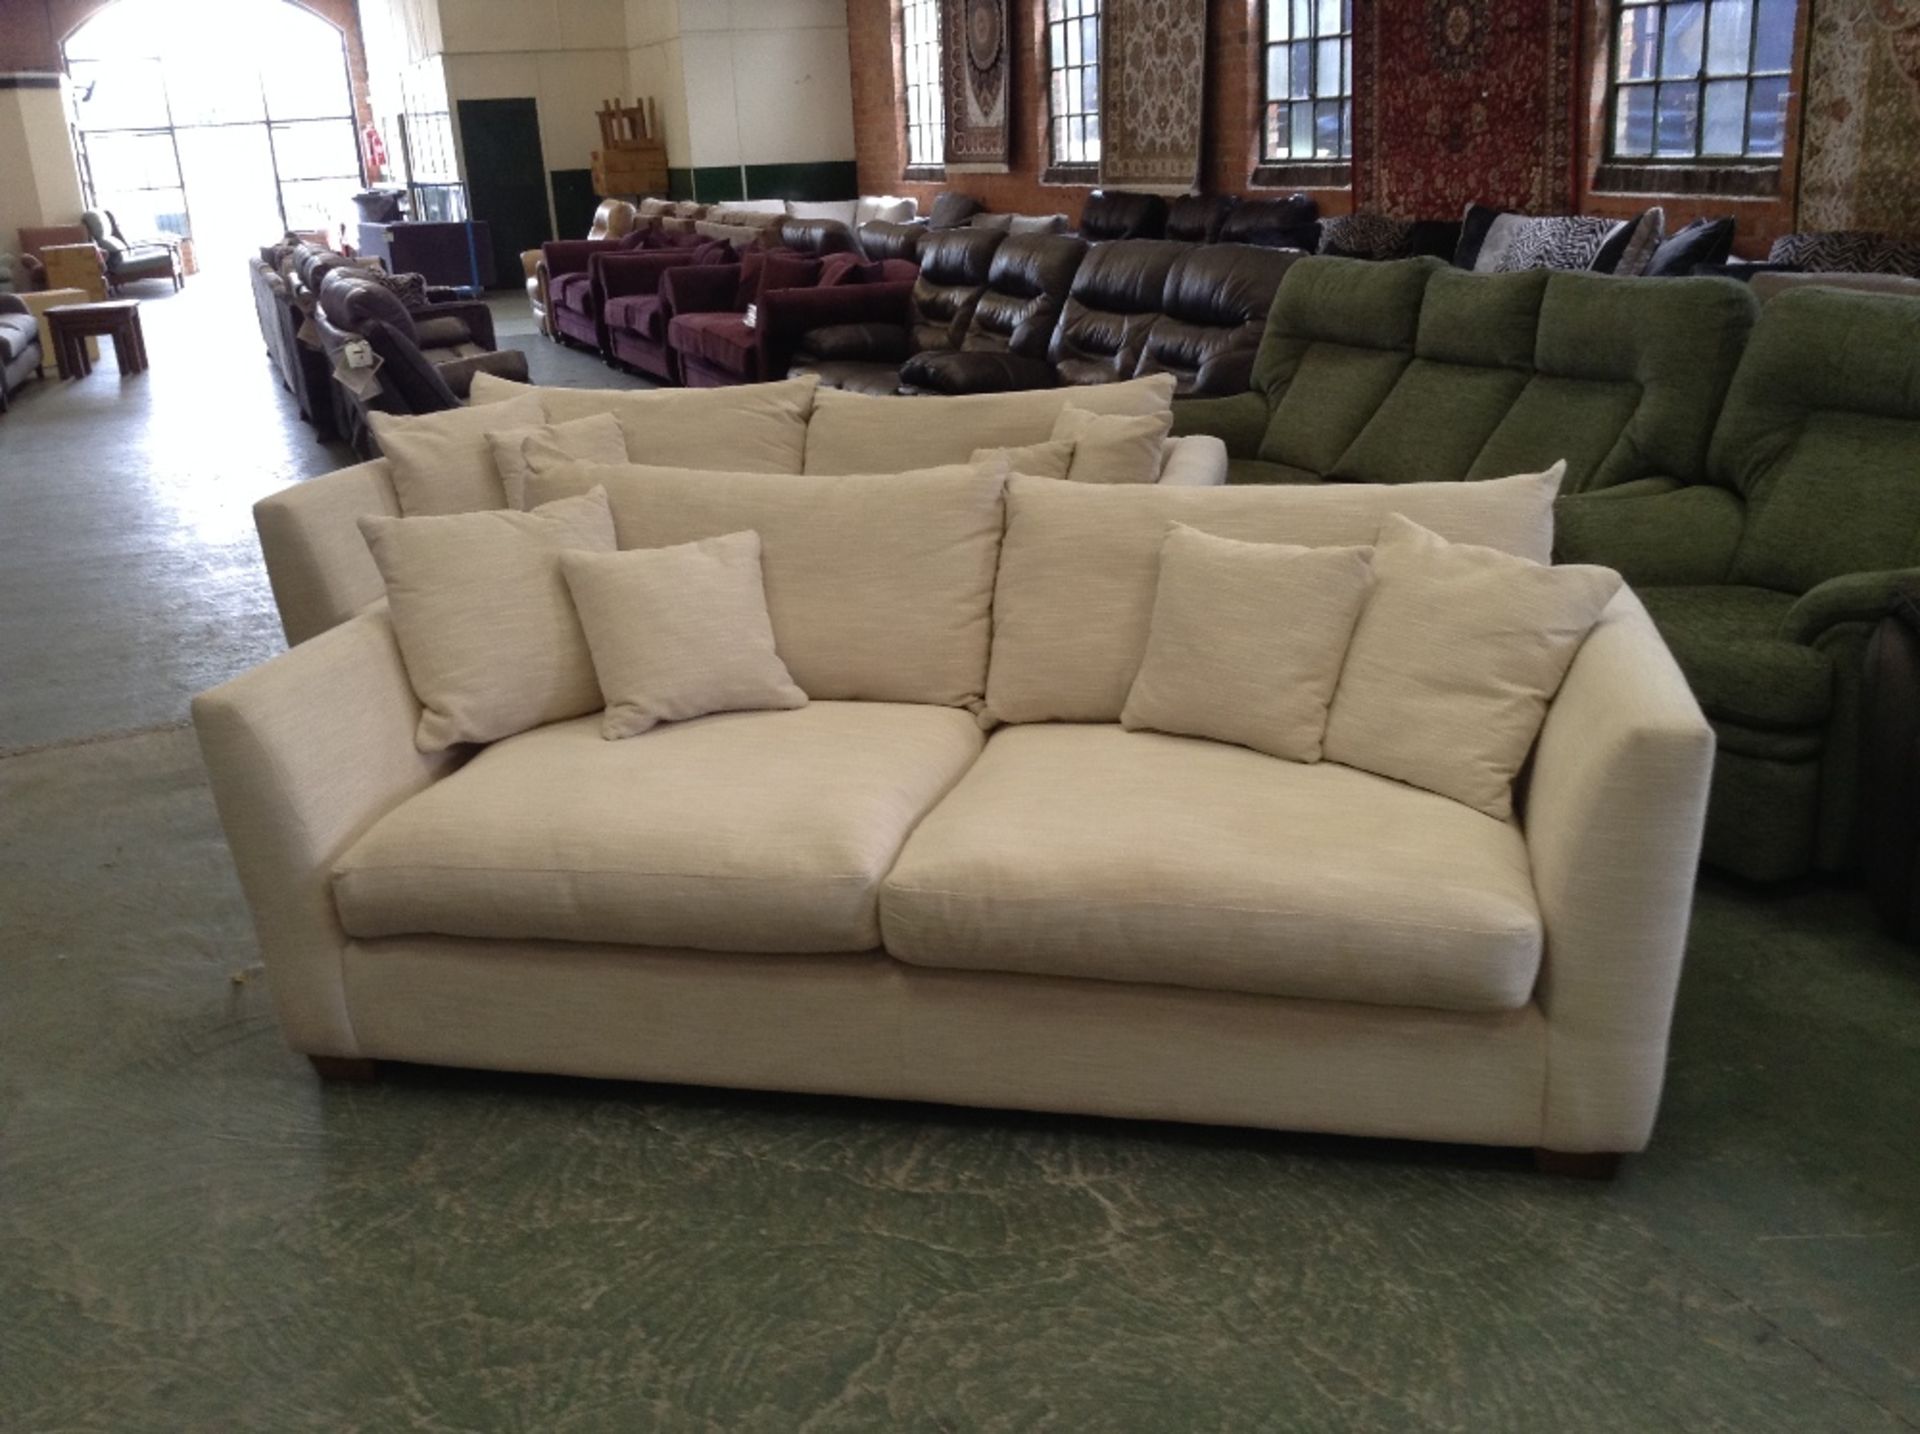 2 x NATURAL 3 SEATER SOFAS